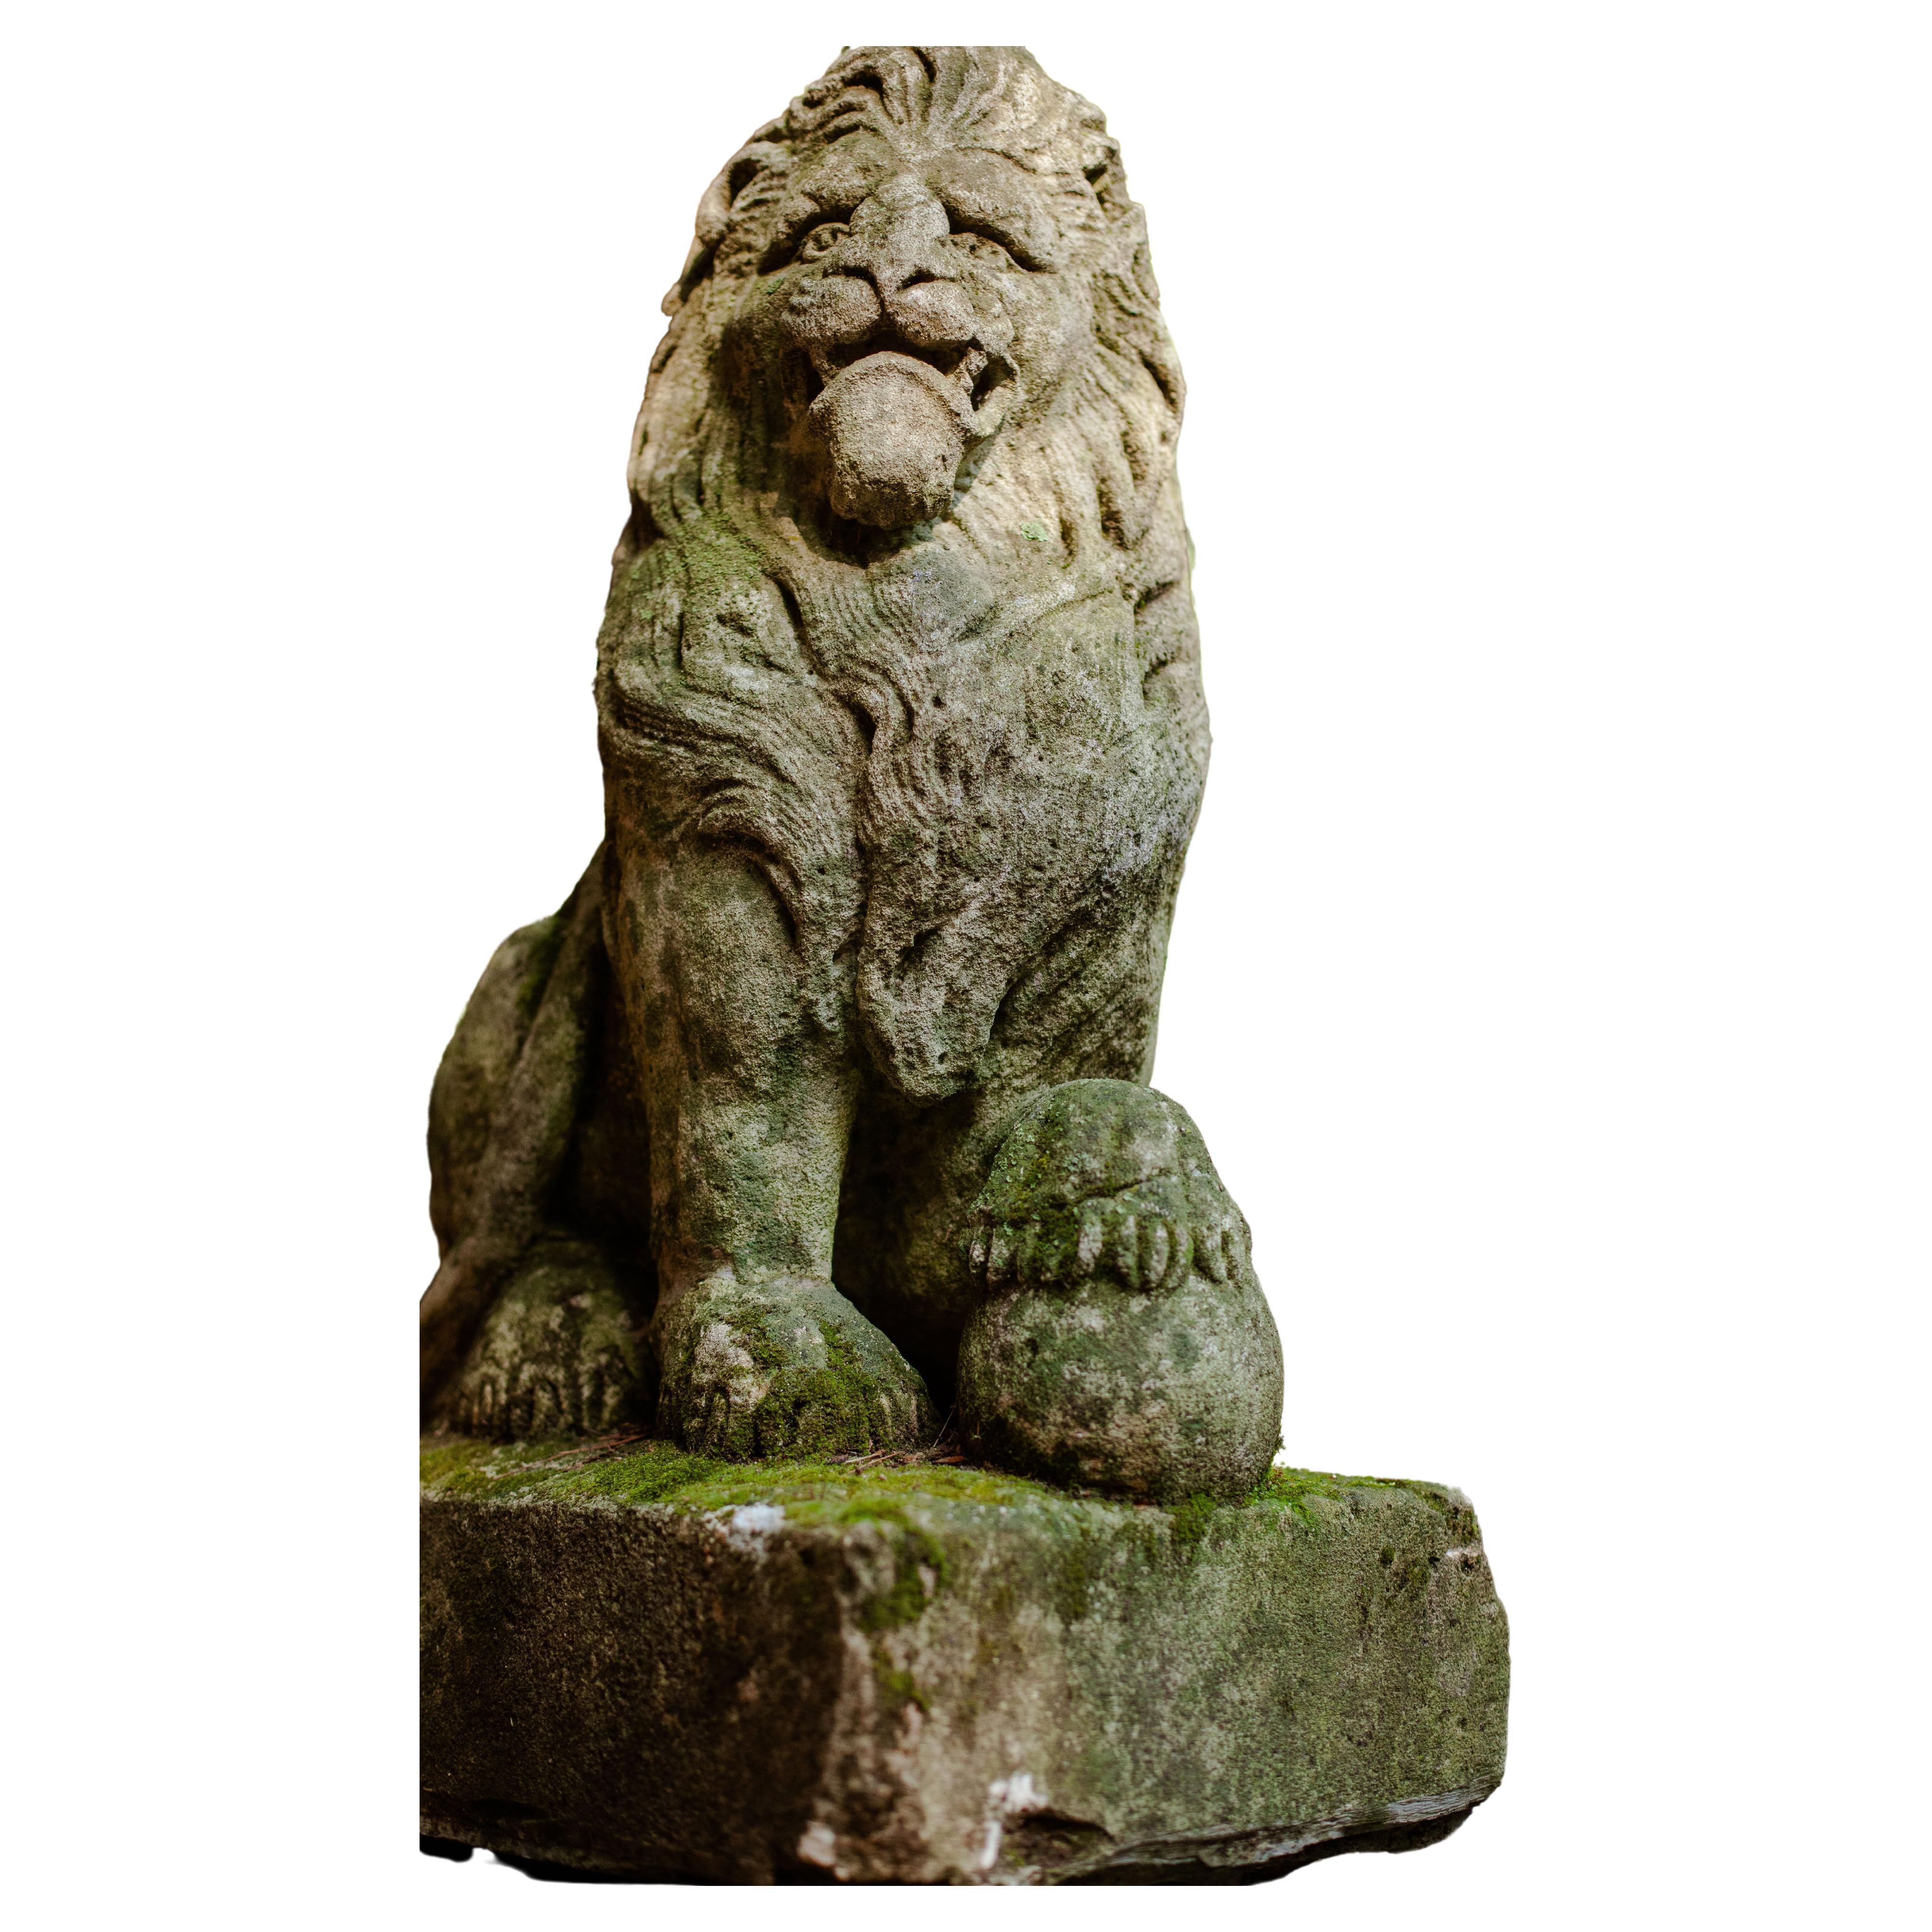 Pair of 19th century Regal Carved English Stone Lion